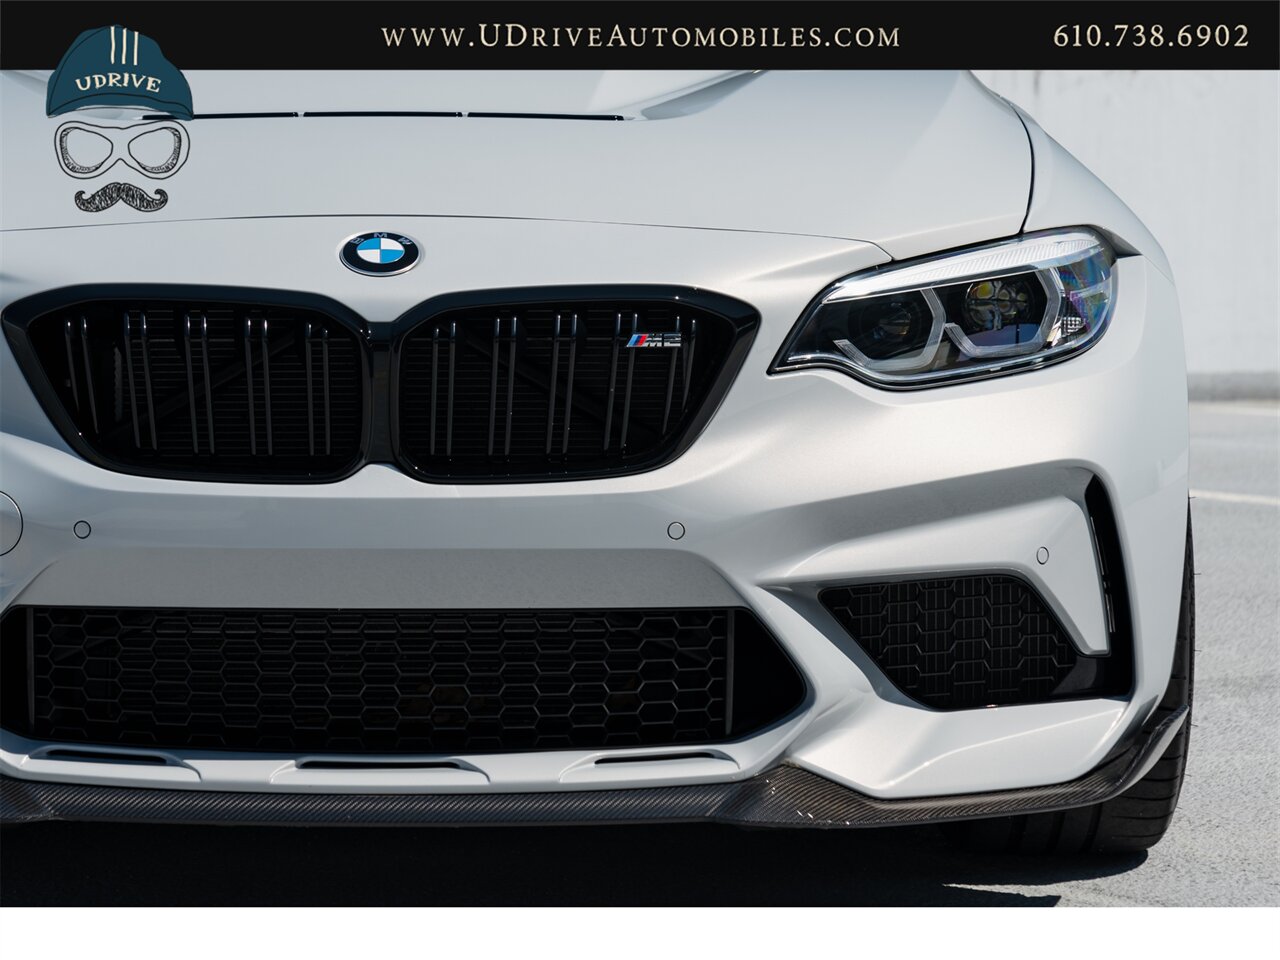 2020 BMW M2 CS  M2 CS 6 Speed Manual 2k Miles Full Body PPF Factory Warranty until 2025 - Photo 11 - West Chester, PA 19382